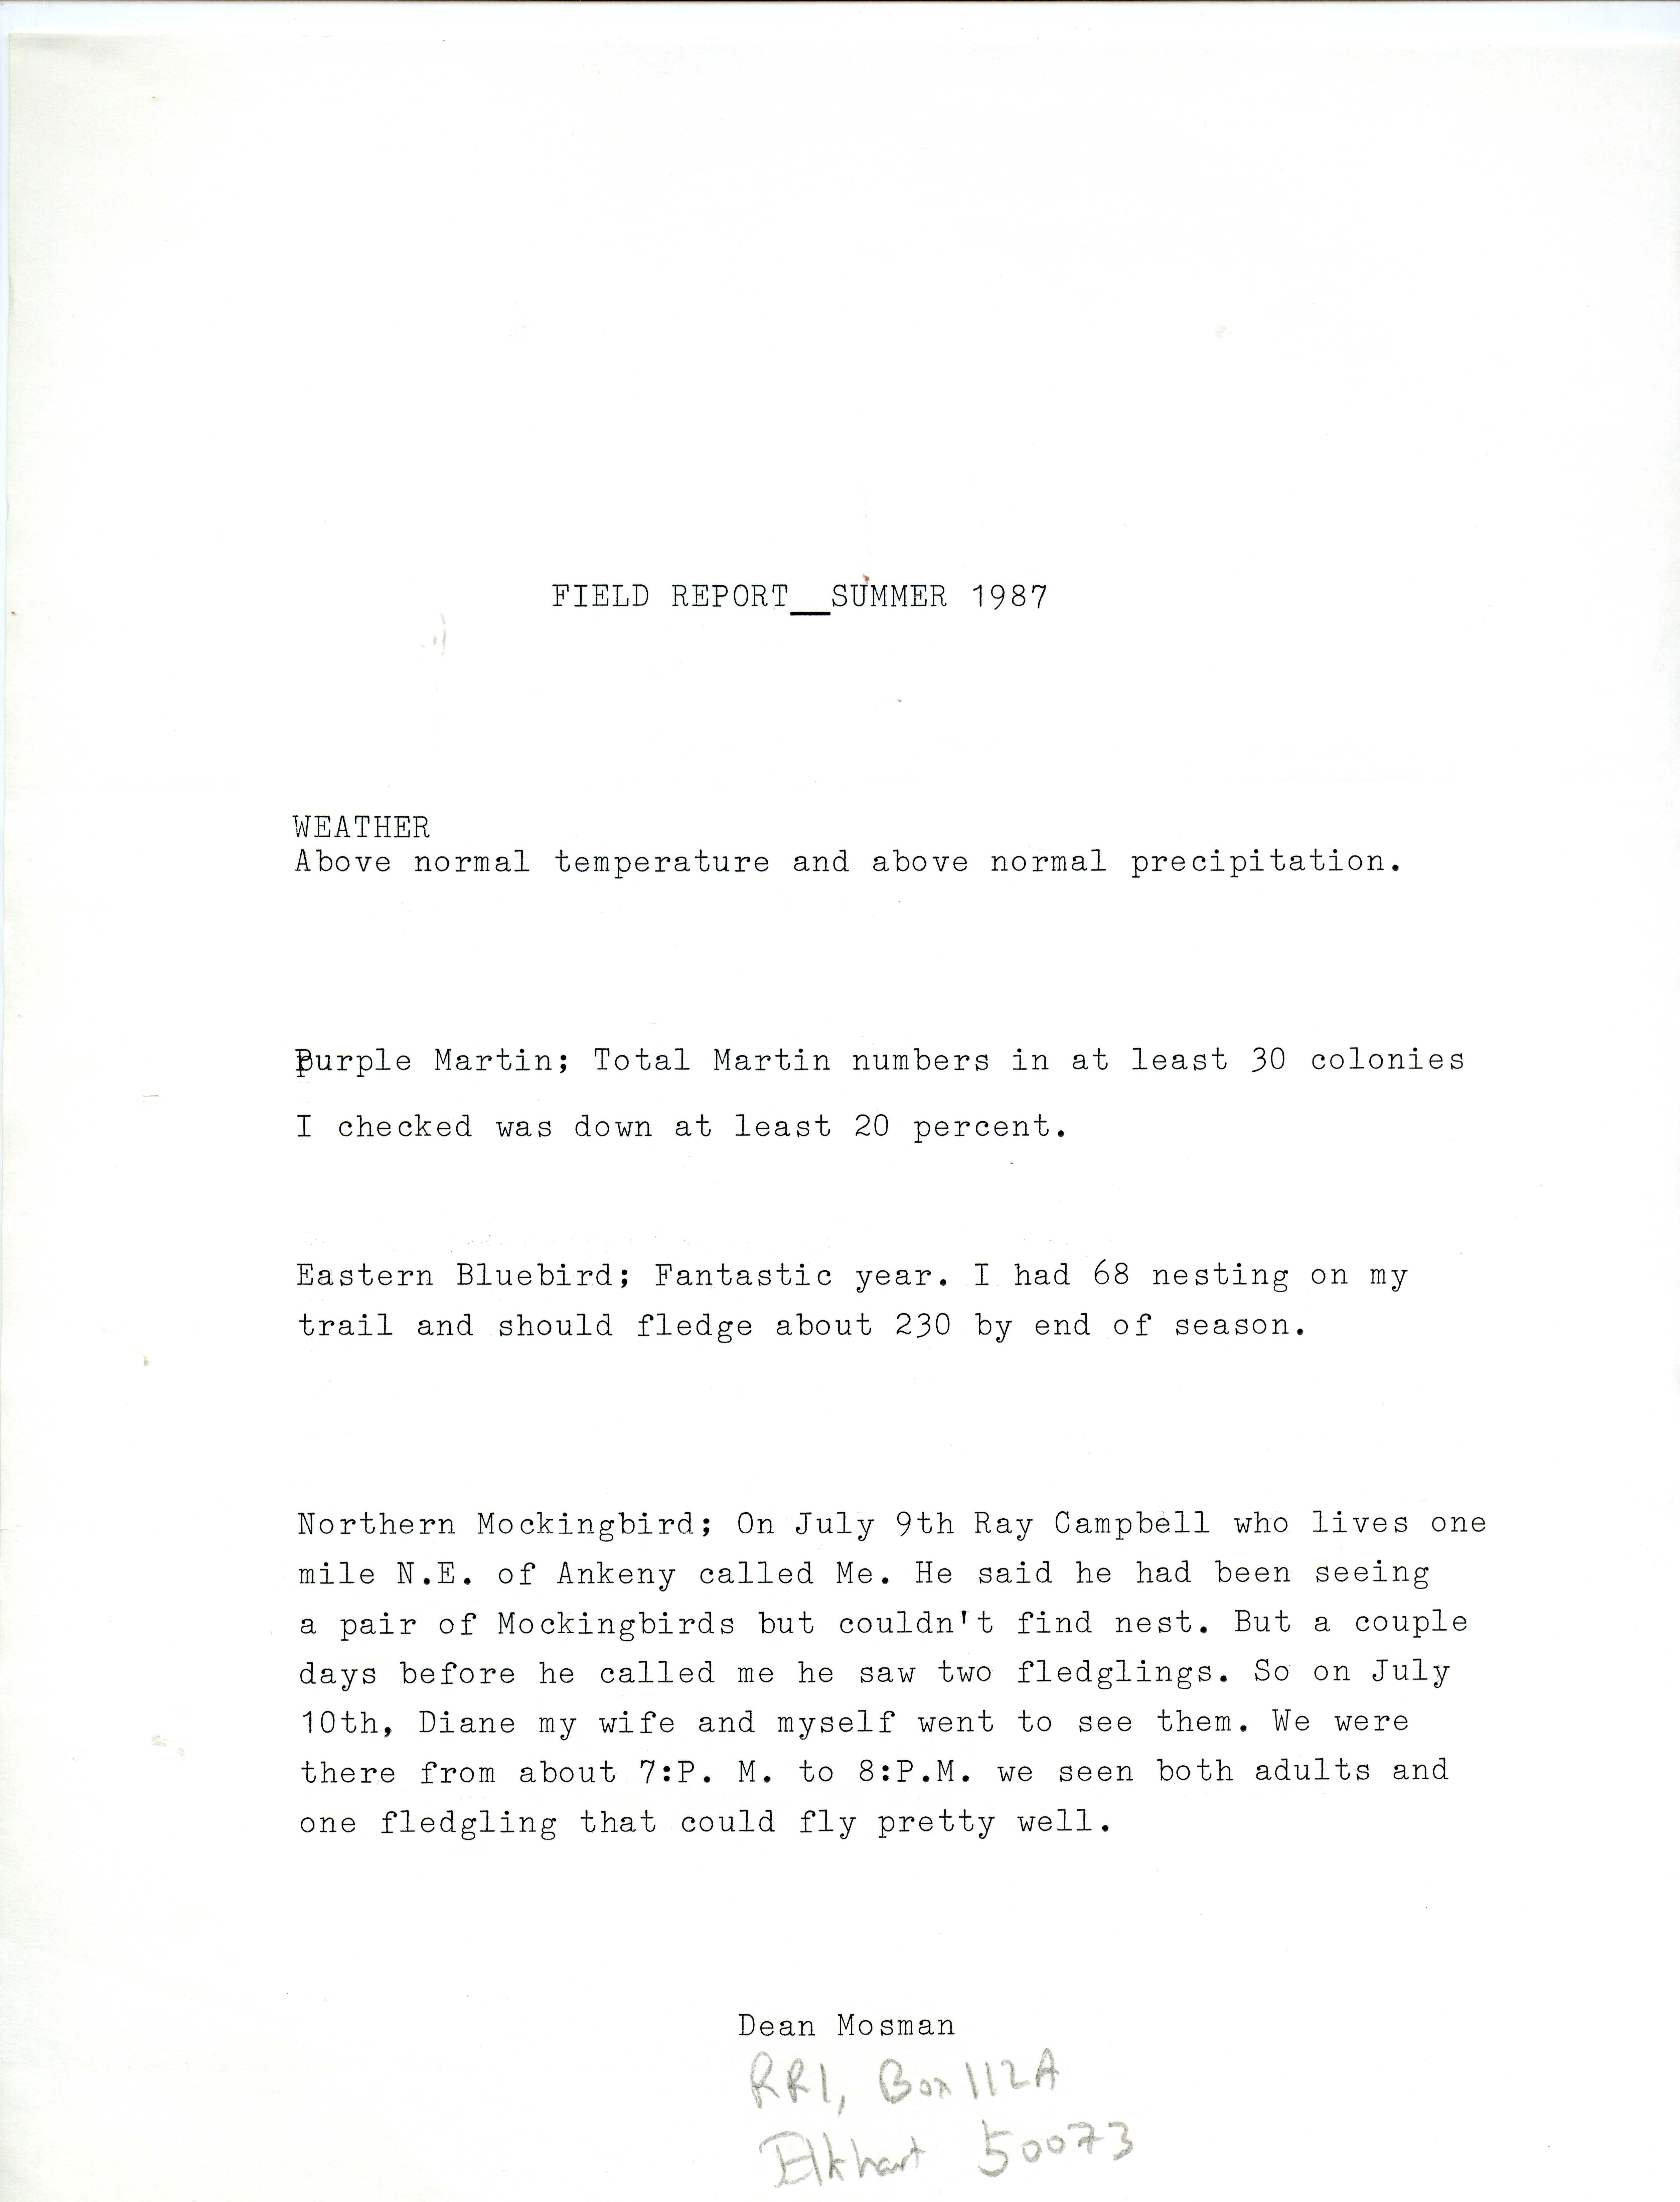 Field notes contributed by Dean Mosman, summer 1987